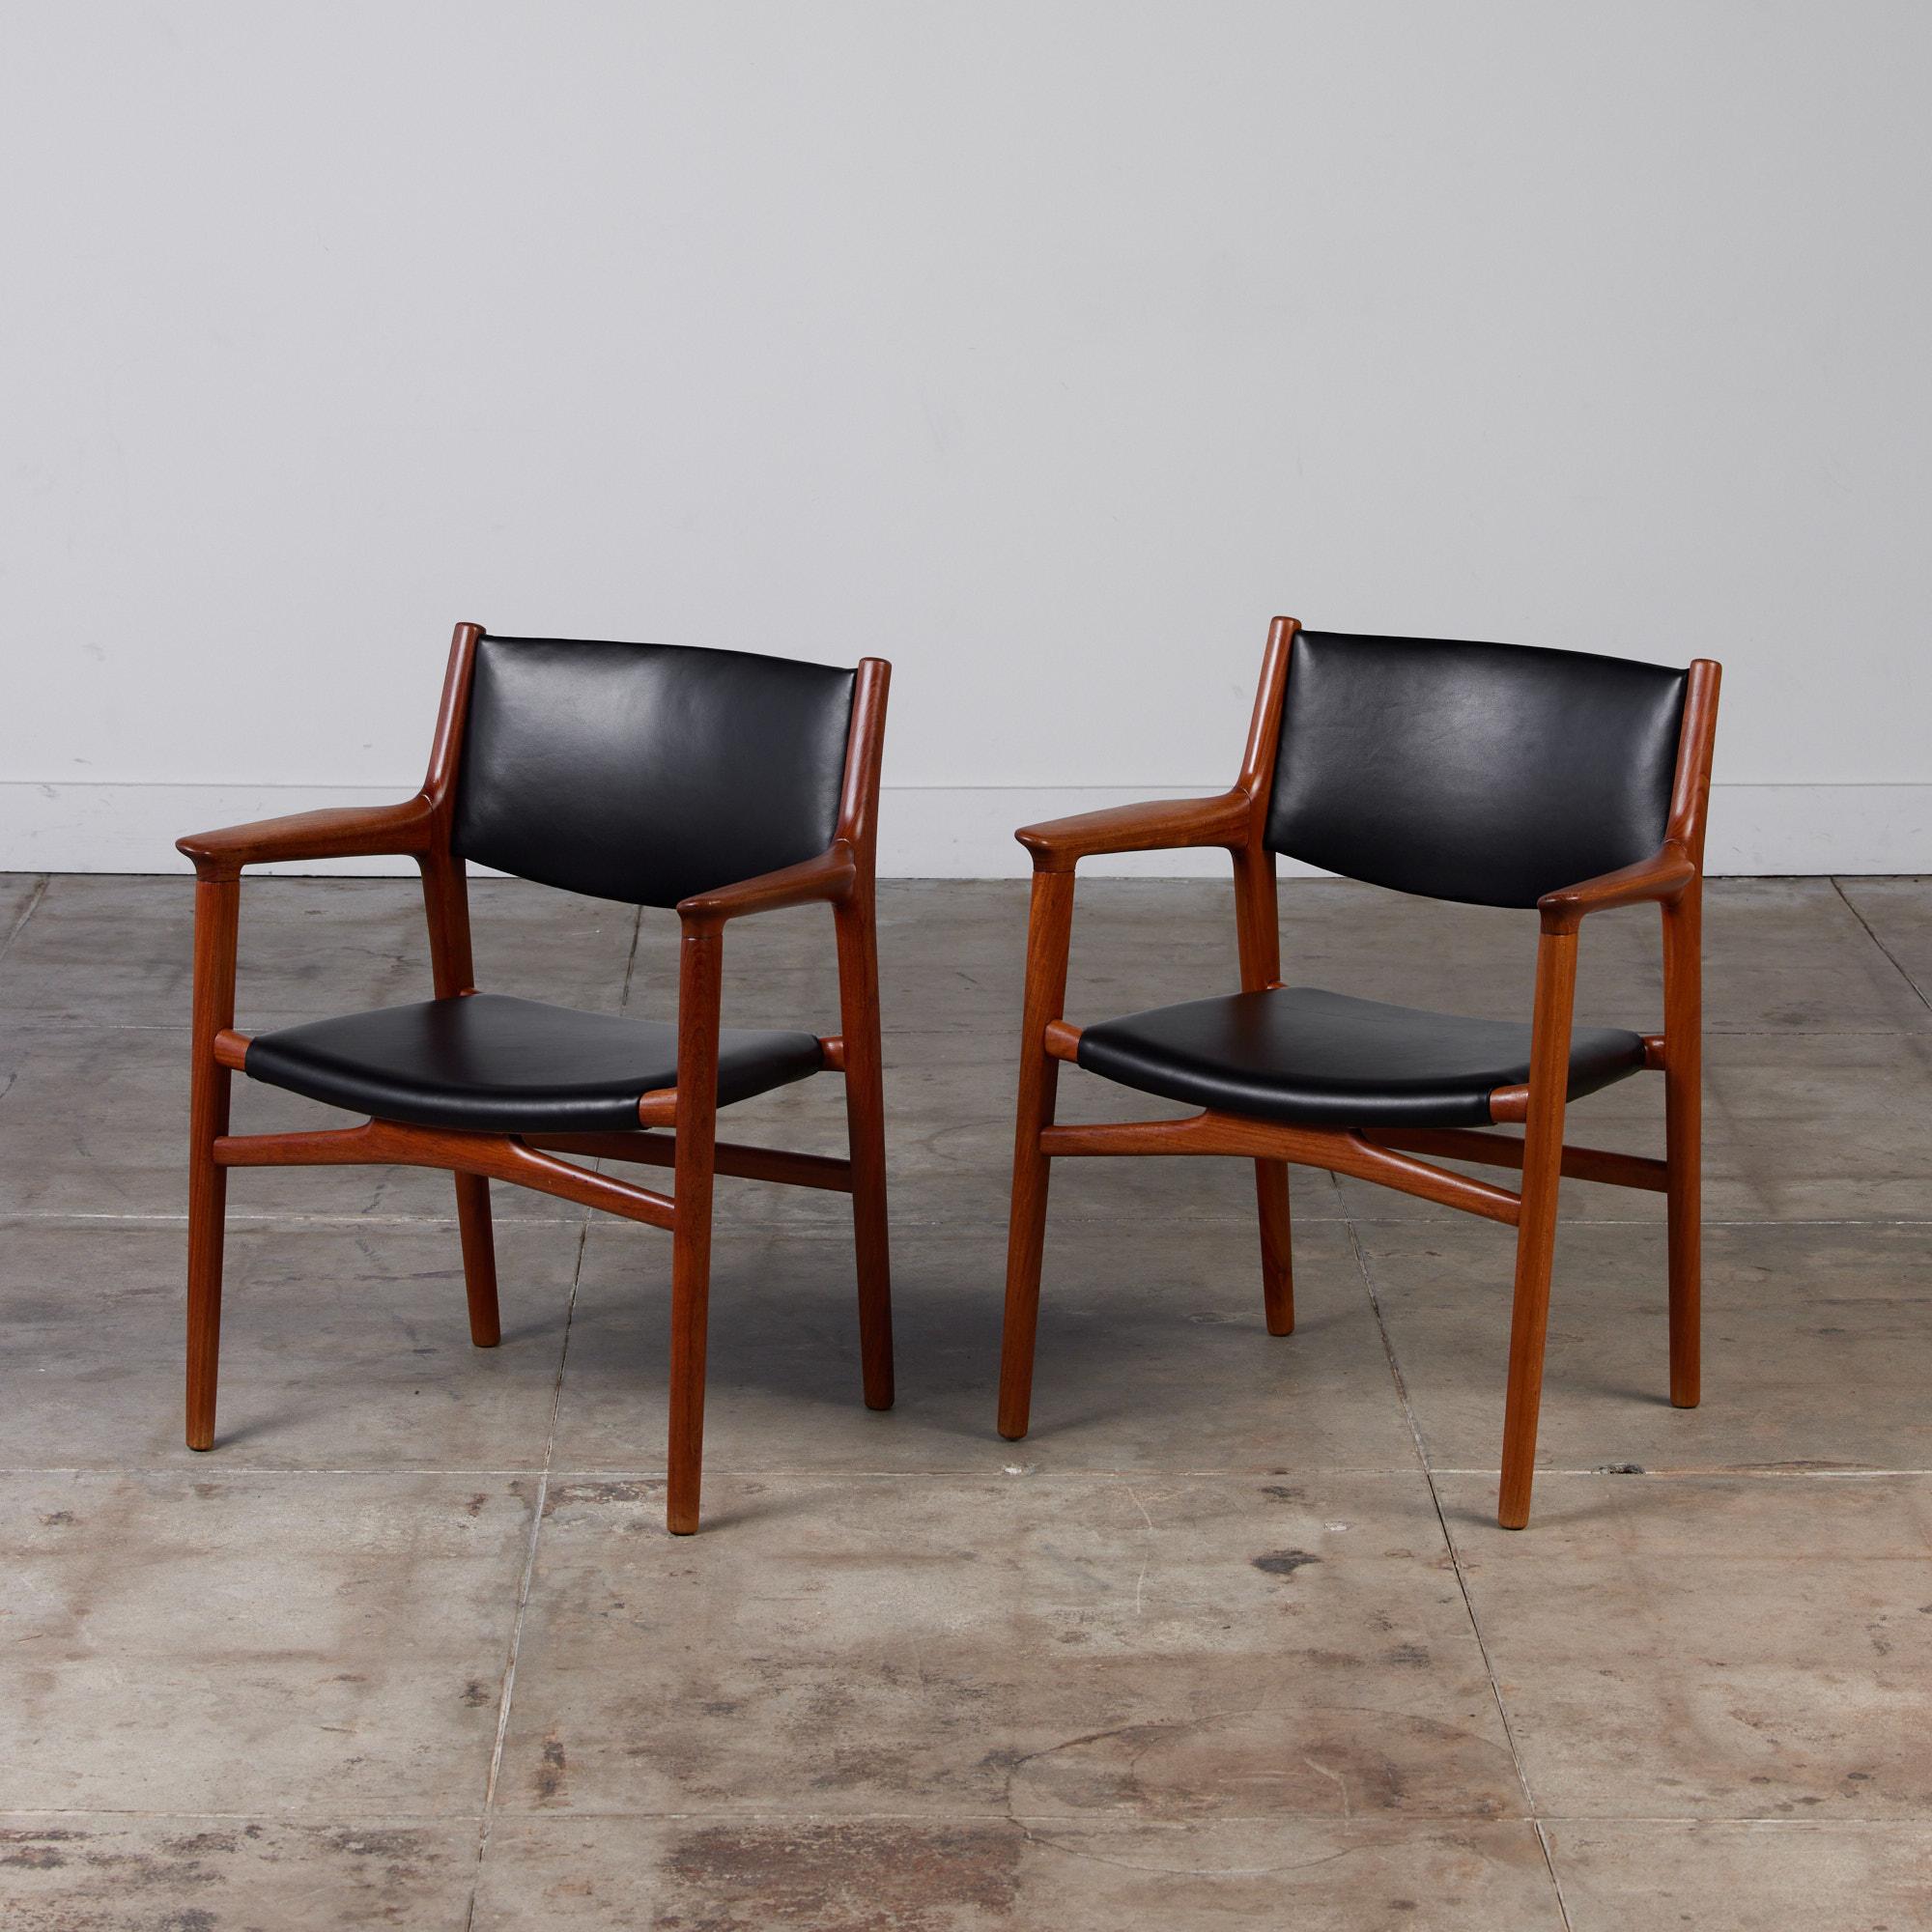 Hans J. Wegner teak armchair c.1950s, Denmark, for Johannes Hansen. The rare model JH-515 features a black leather backrest and seat.

Stamped Johannes Hansen, COPENHAGEN, DENMARK.

Two chairs available; they are priced